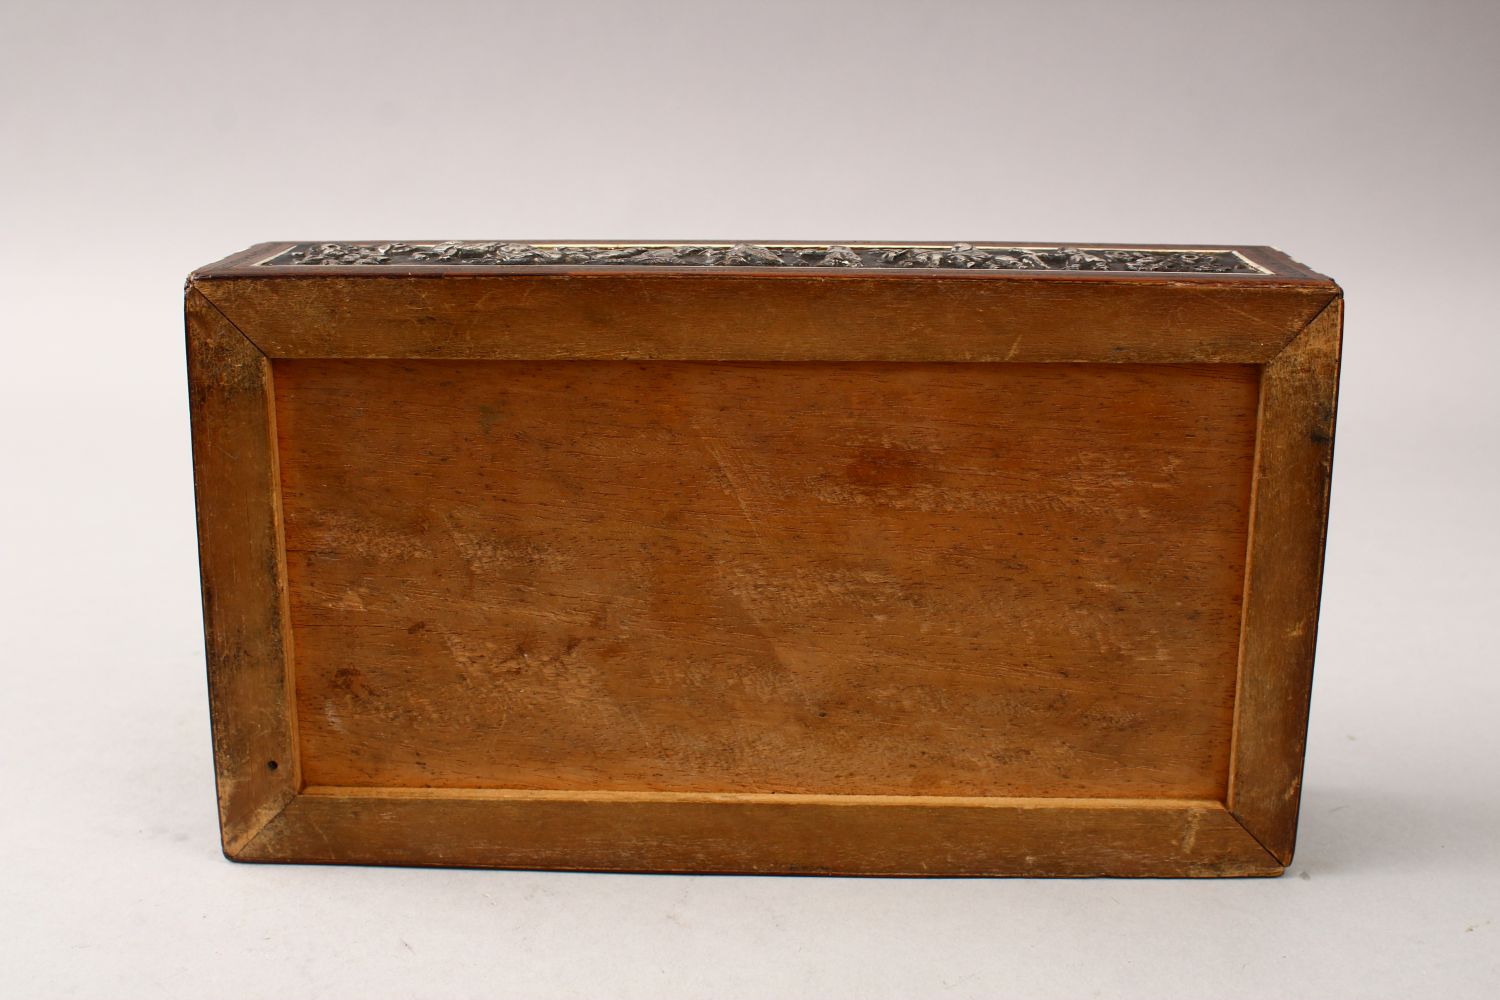 A GOOD IRANIAN SHIRAZ KHATEMI WOODEN & WHITE METAL BOX, the bod with inset white metal embossed - Image 10 of 10